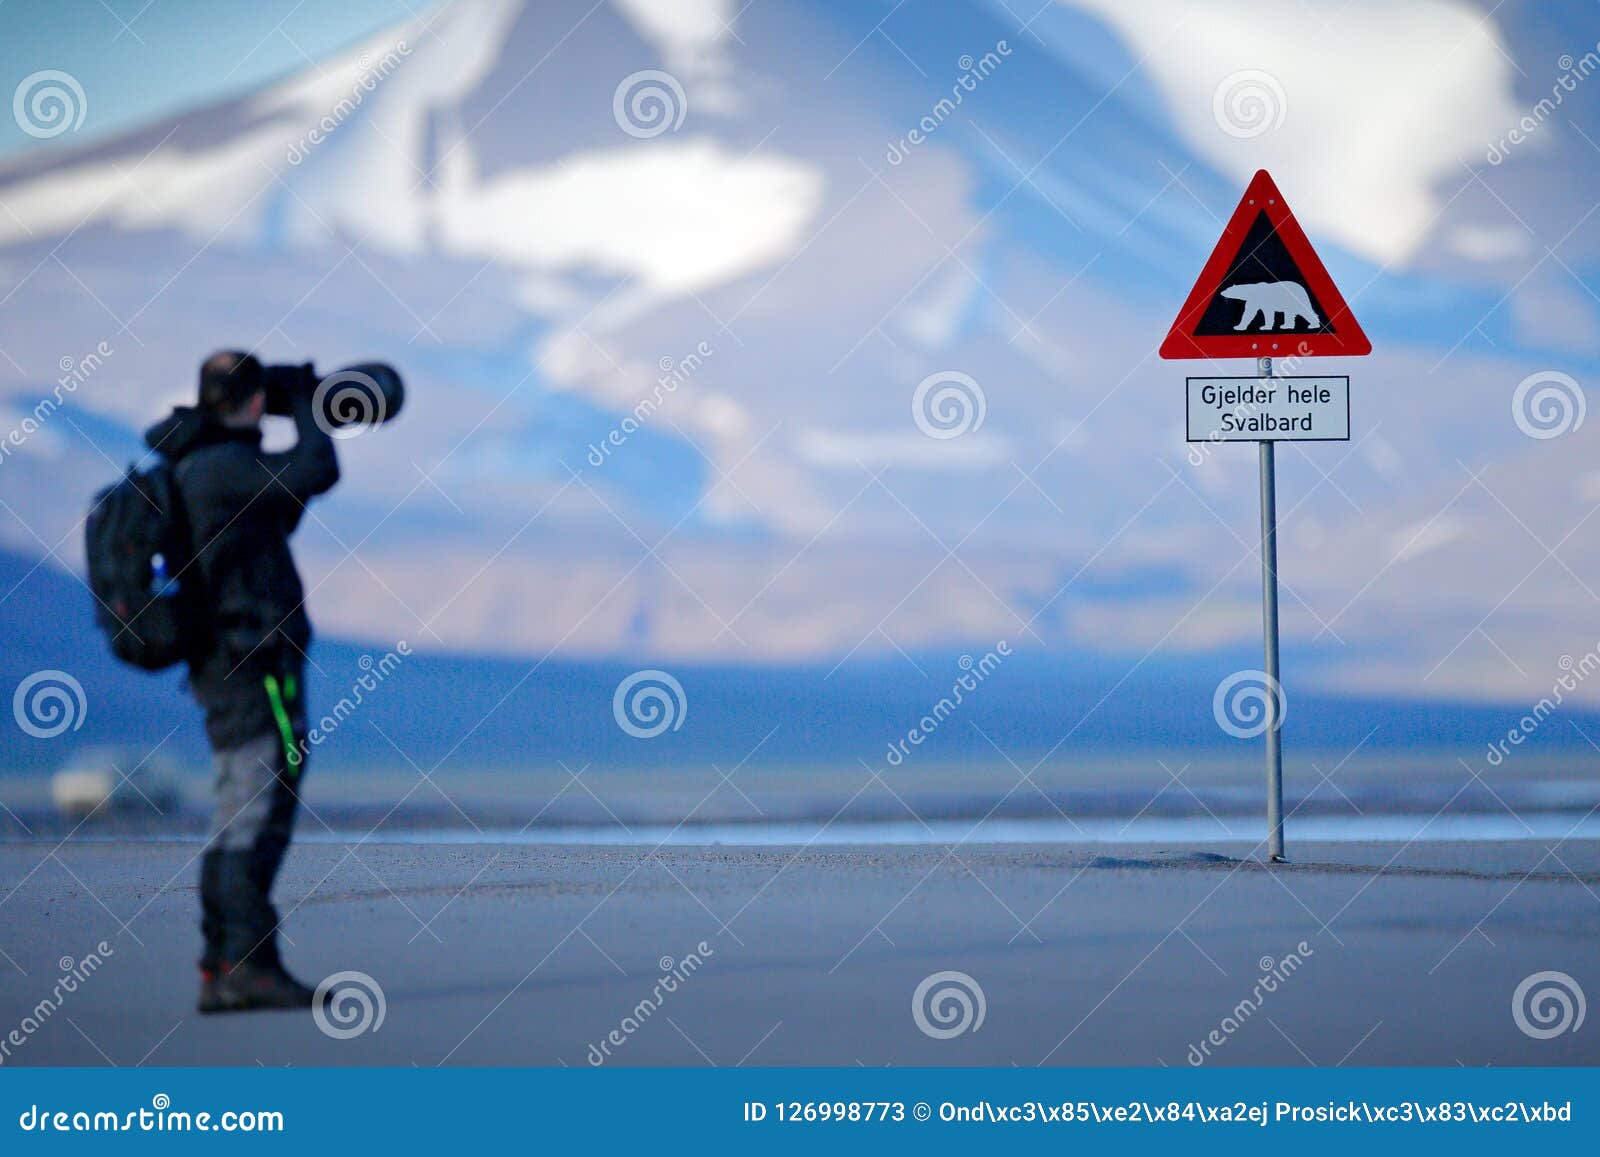 photographer with big lens and road traffic sign with polar bear. Ã¯Â¿Â½gjelder hele svalbard means over all of svalbard watch out f